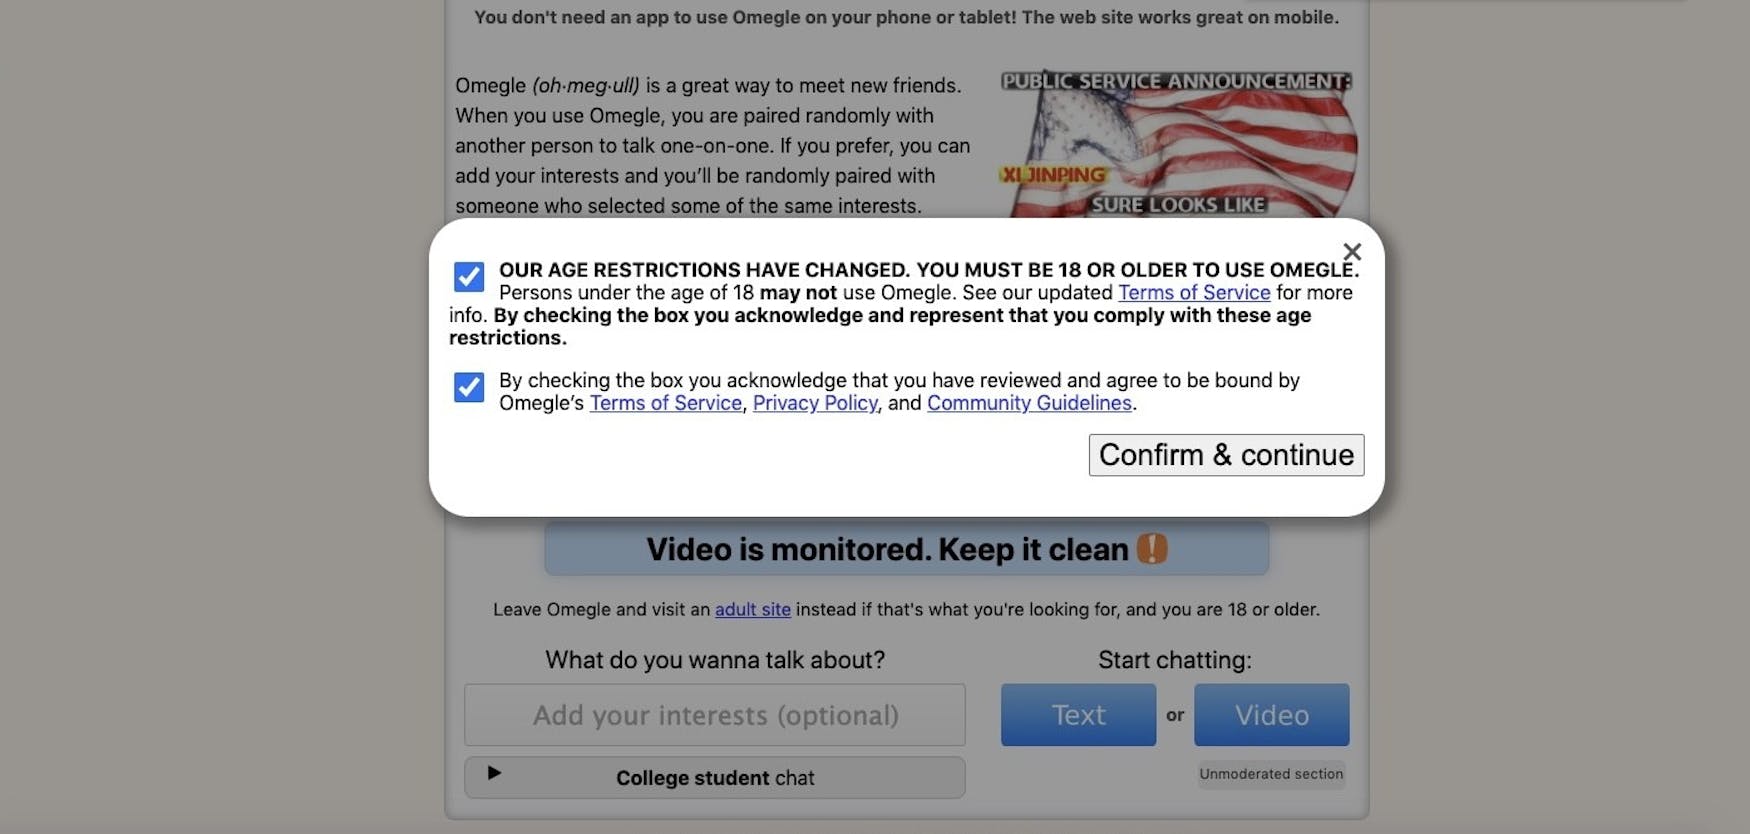 CONTENT MODERATION: Omegle has age restrictions, but does not verify them.&nbsp;